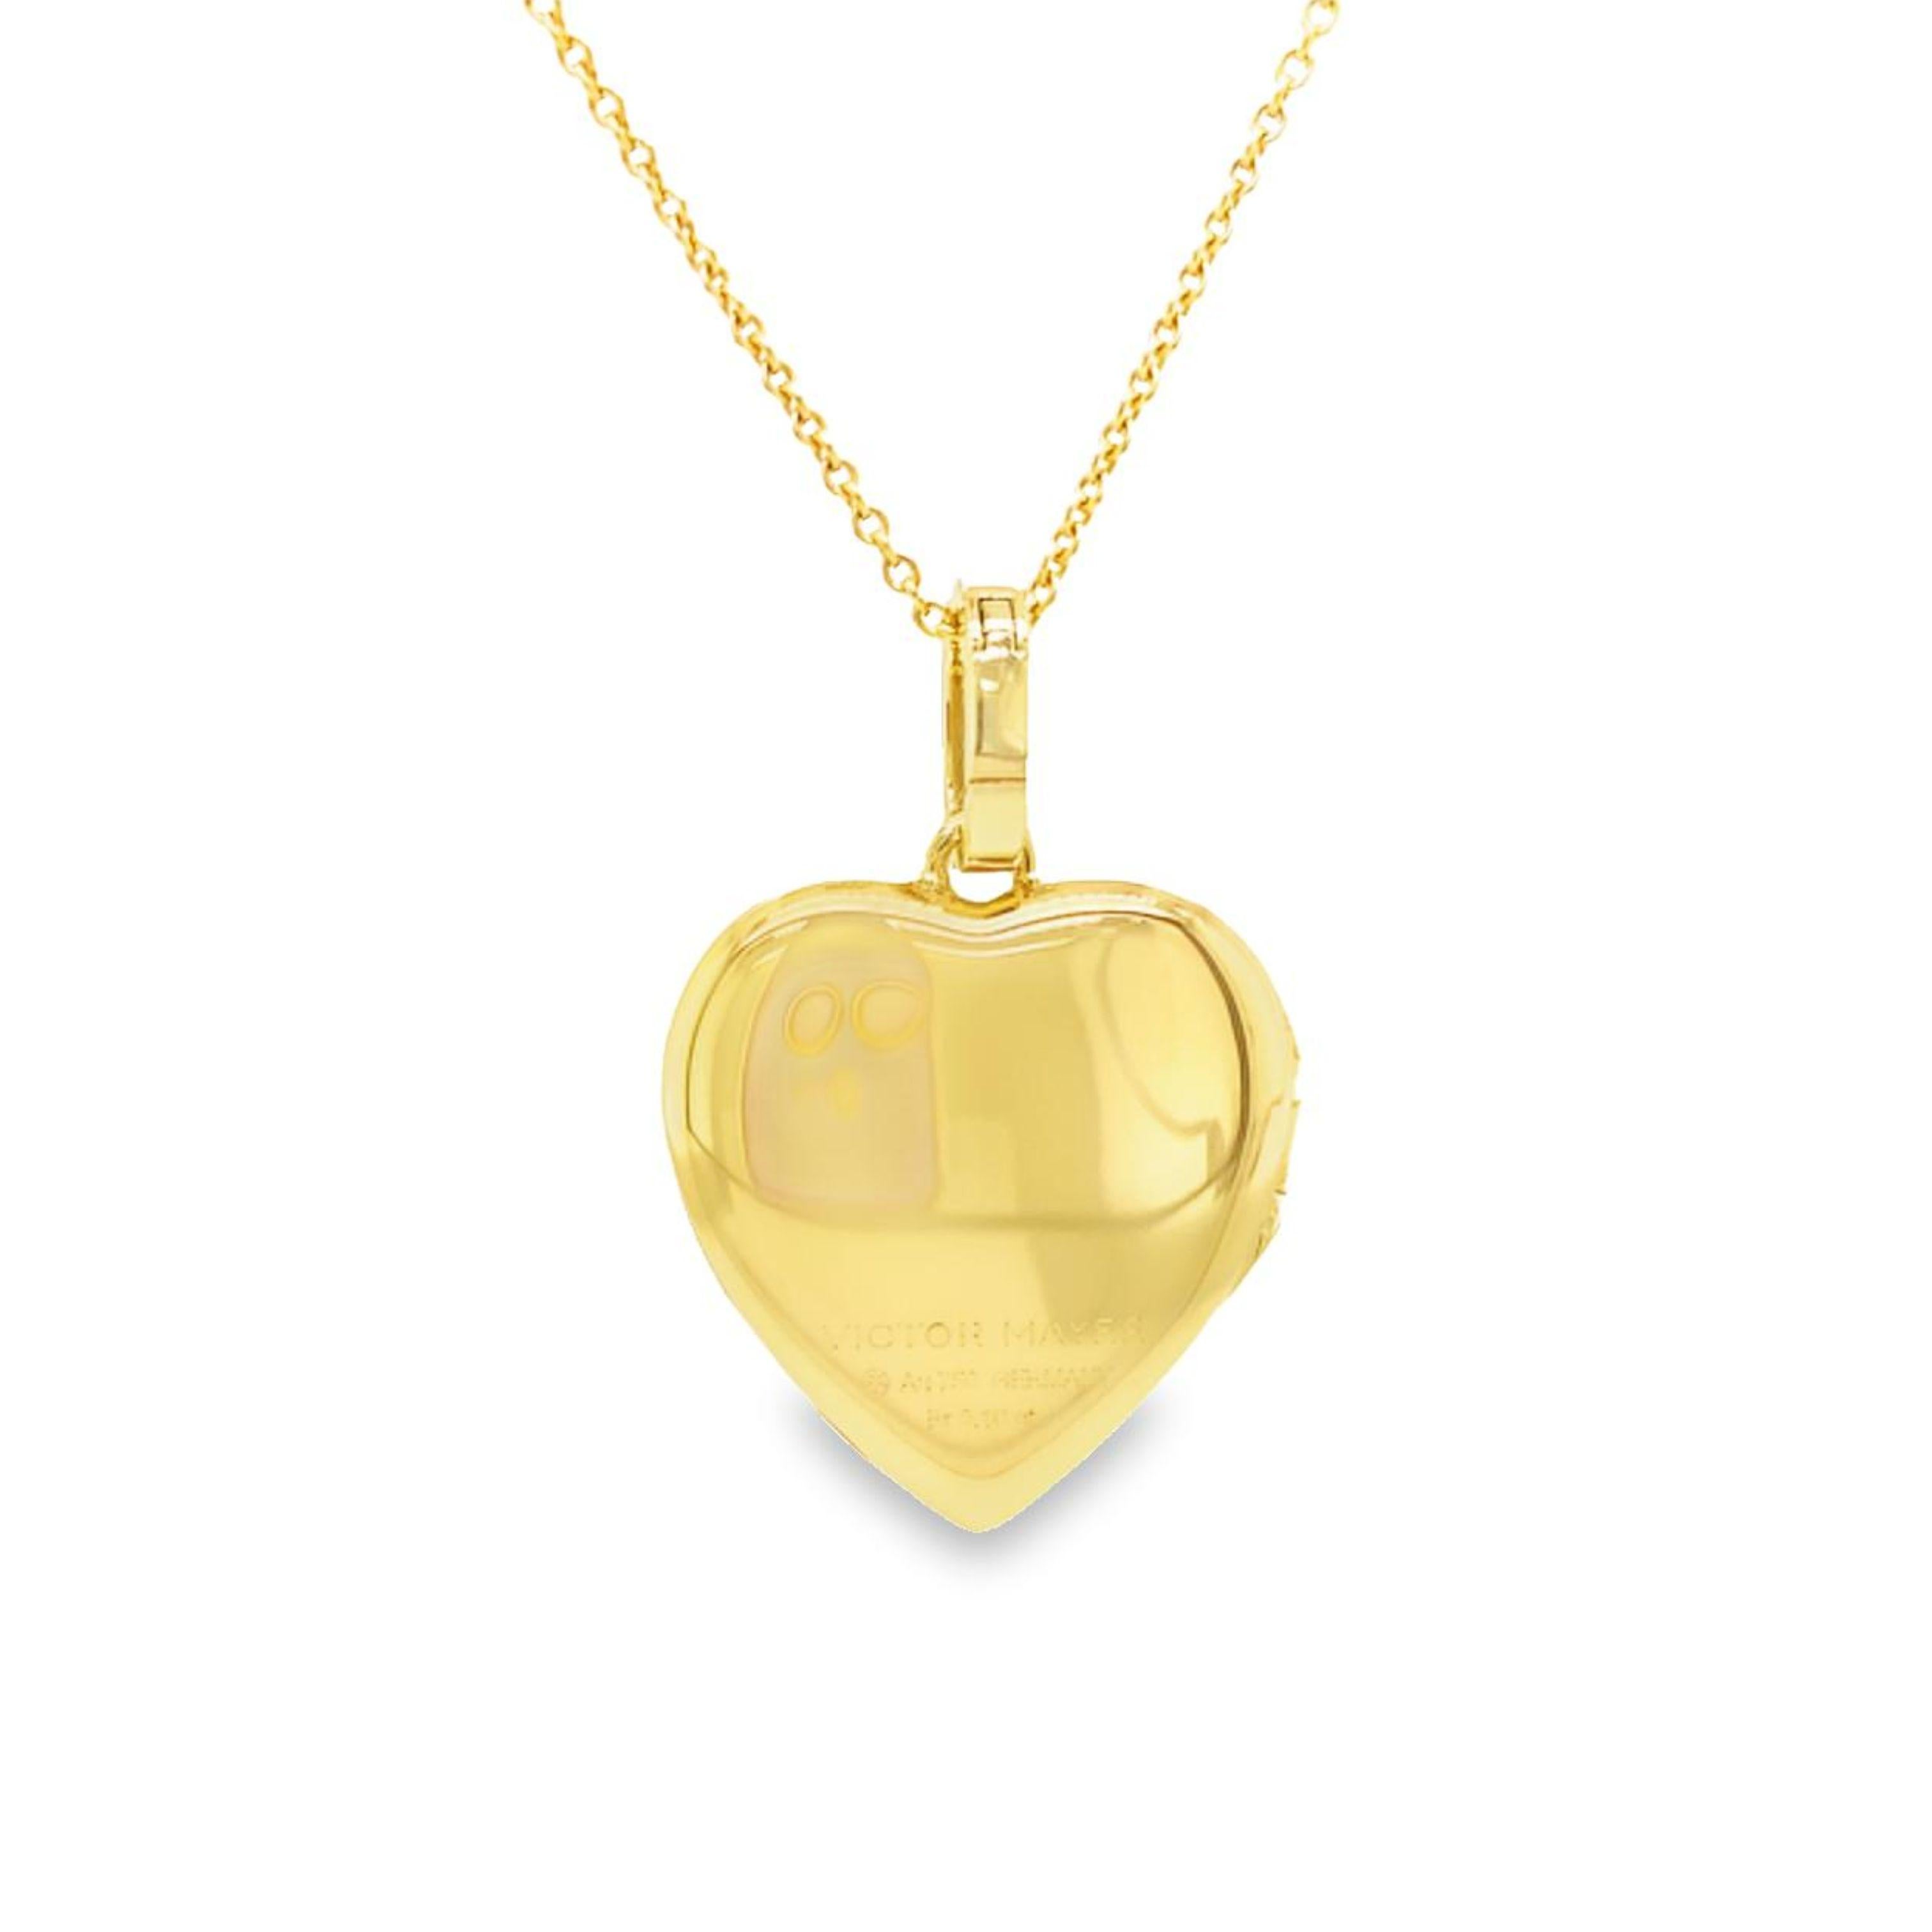 Heart shaped locket pendant by VICTOR MAYER - 18k yellow gold - Hallmark Collection, 8 diamonds total 0.16 ct, G VS, for two pictures

About the creator Victor Mayer
Victor Mayer is internationally renowned for elegant timeless designs and